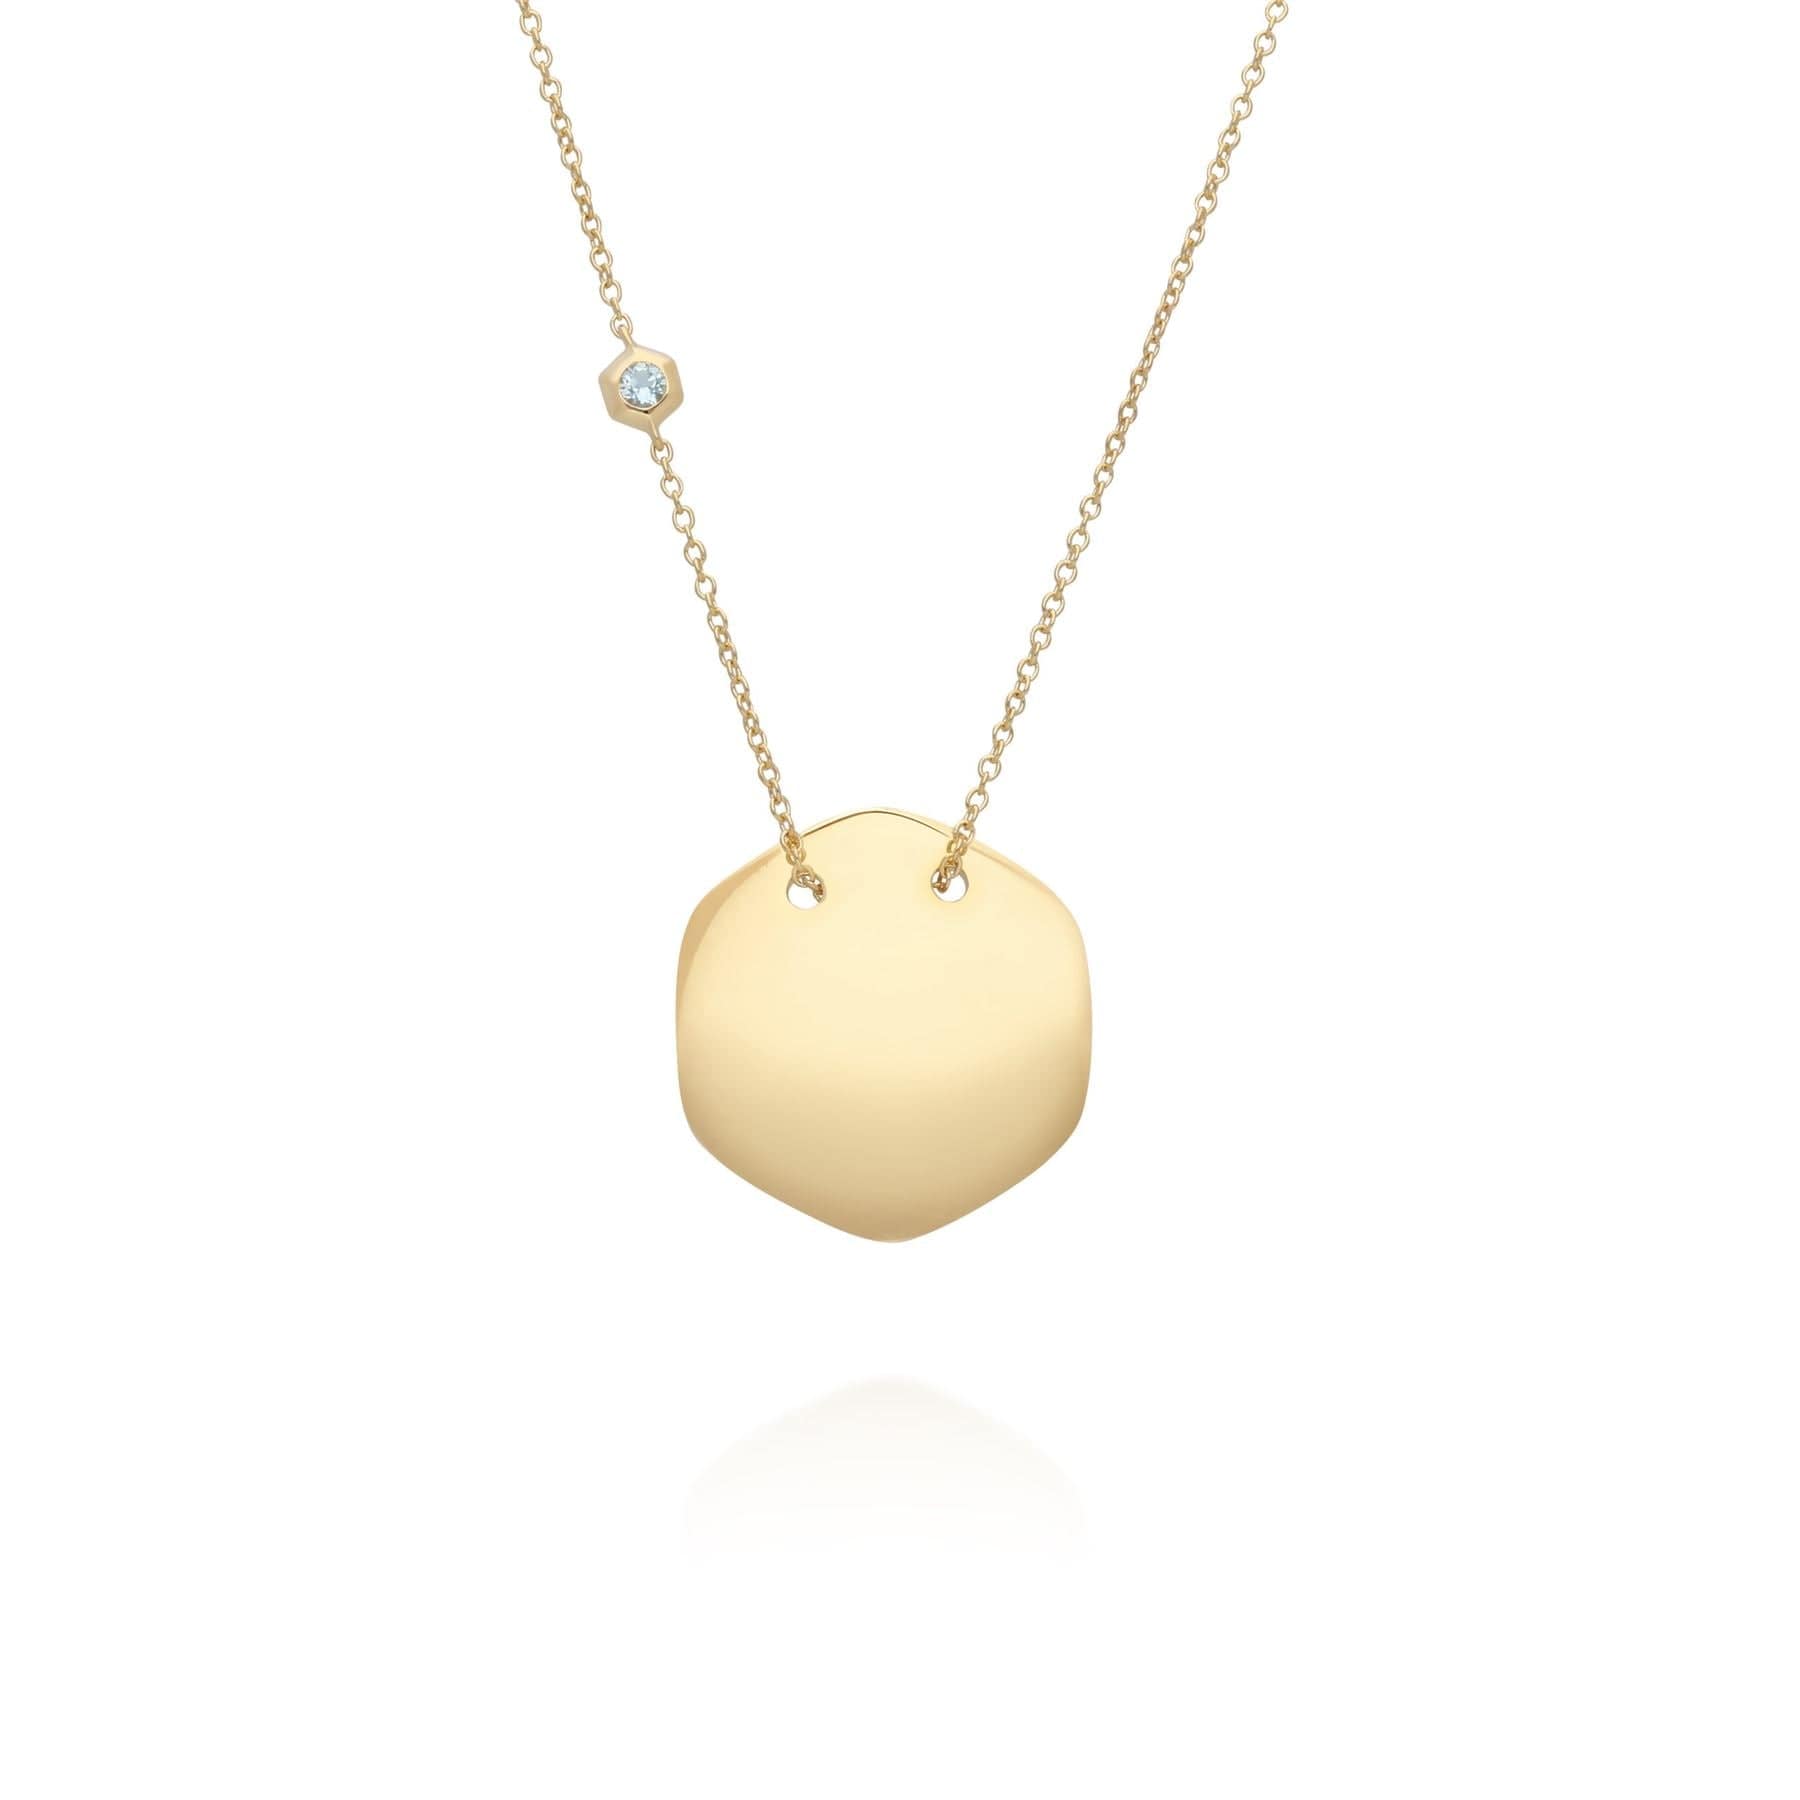 Aquamarine Engravable Necklace in Yellow Gold Plated Sterling Silver - Gemondo